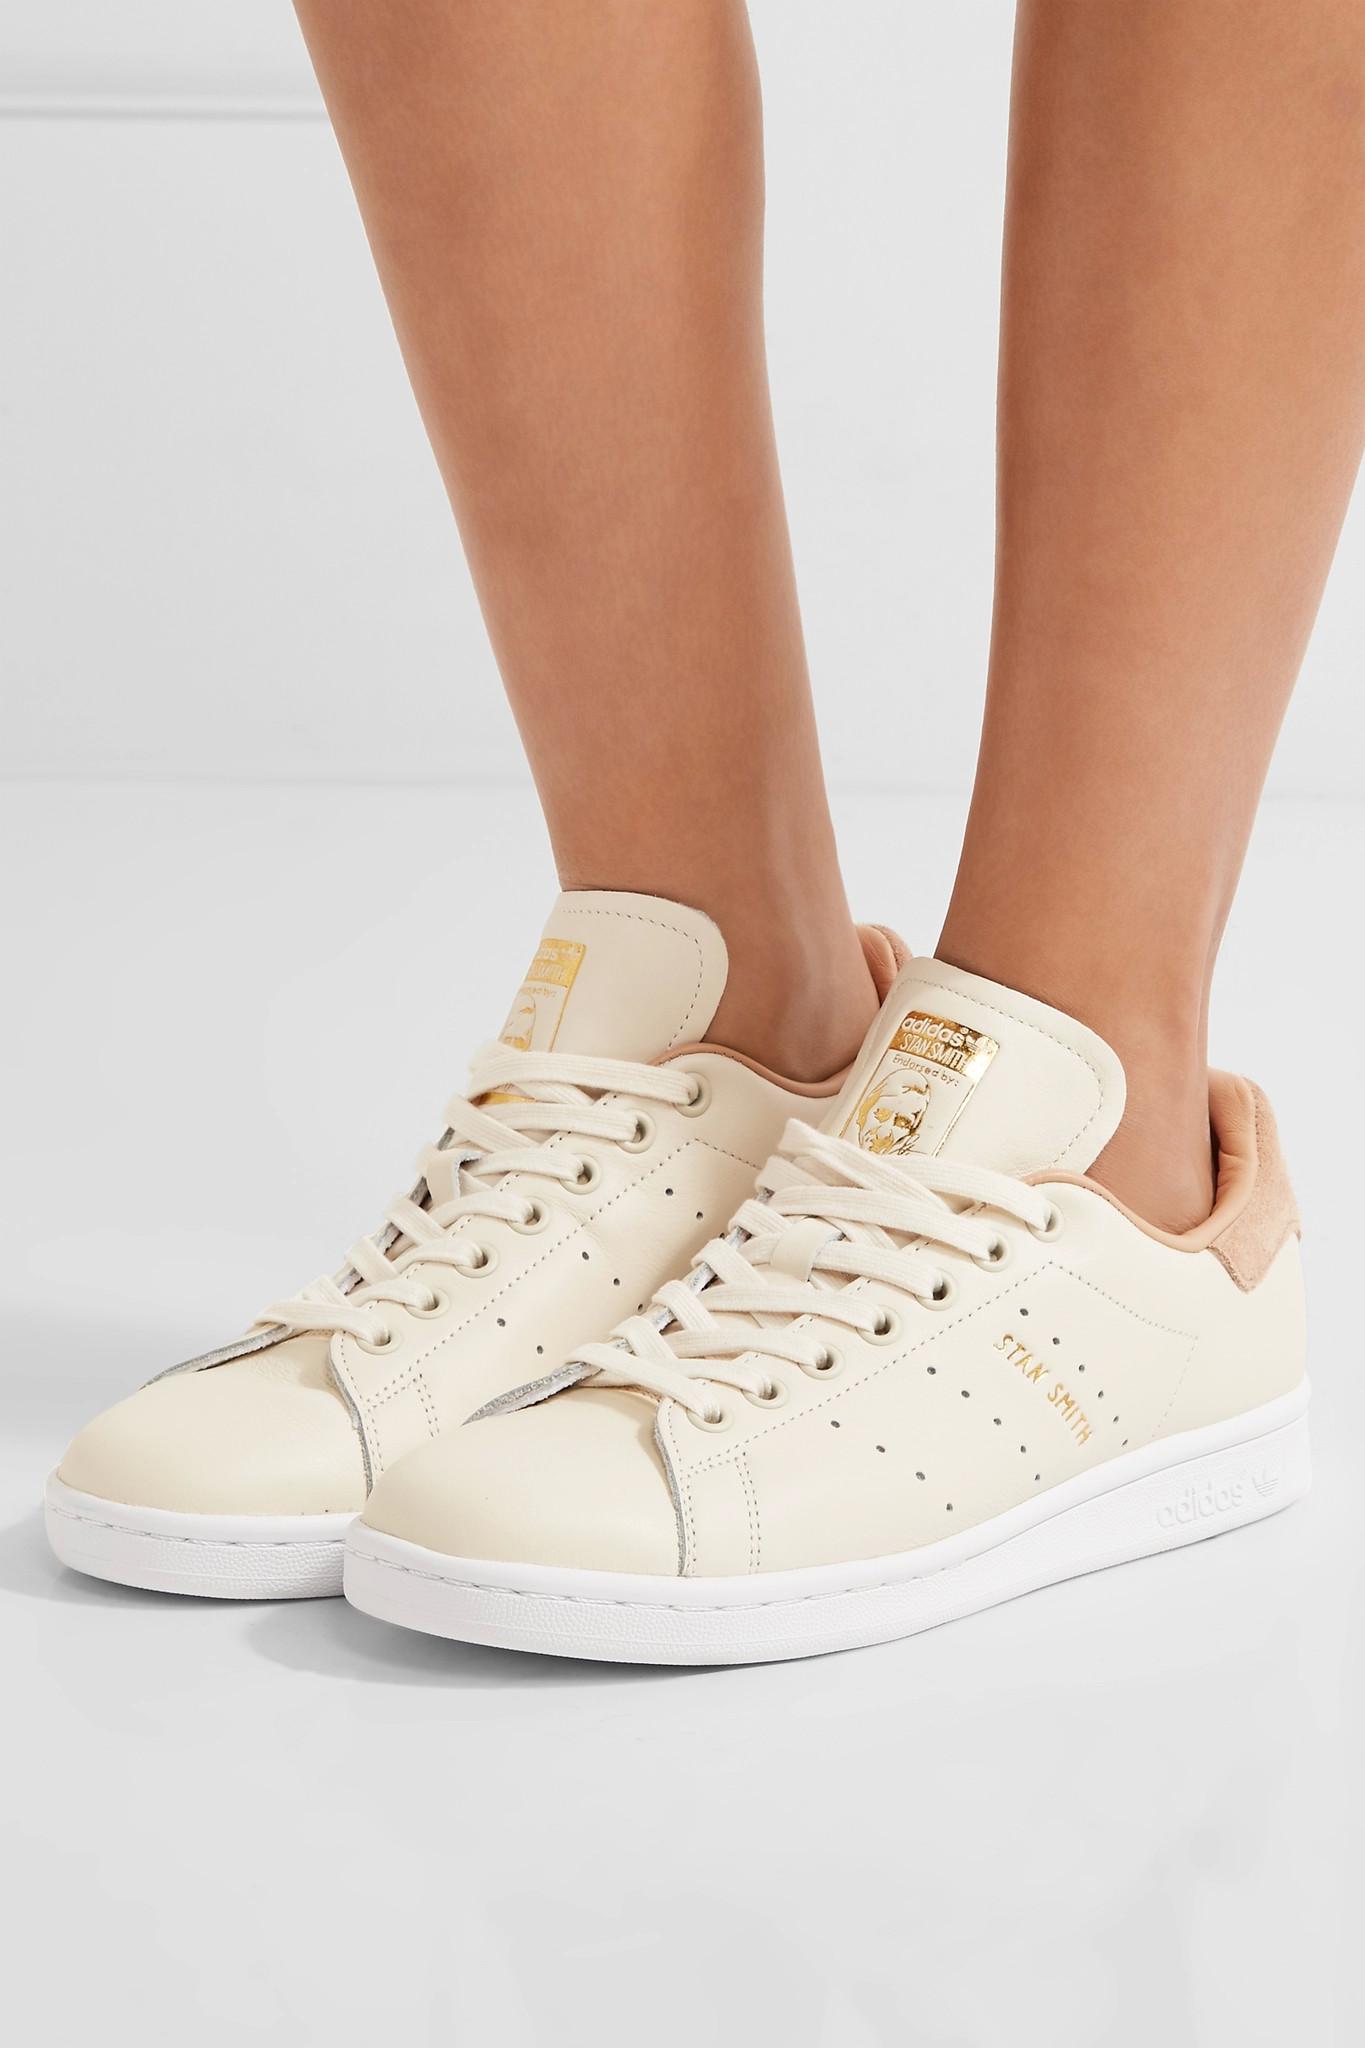 adidas originals off white stan smith sneakers with tan trim